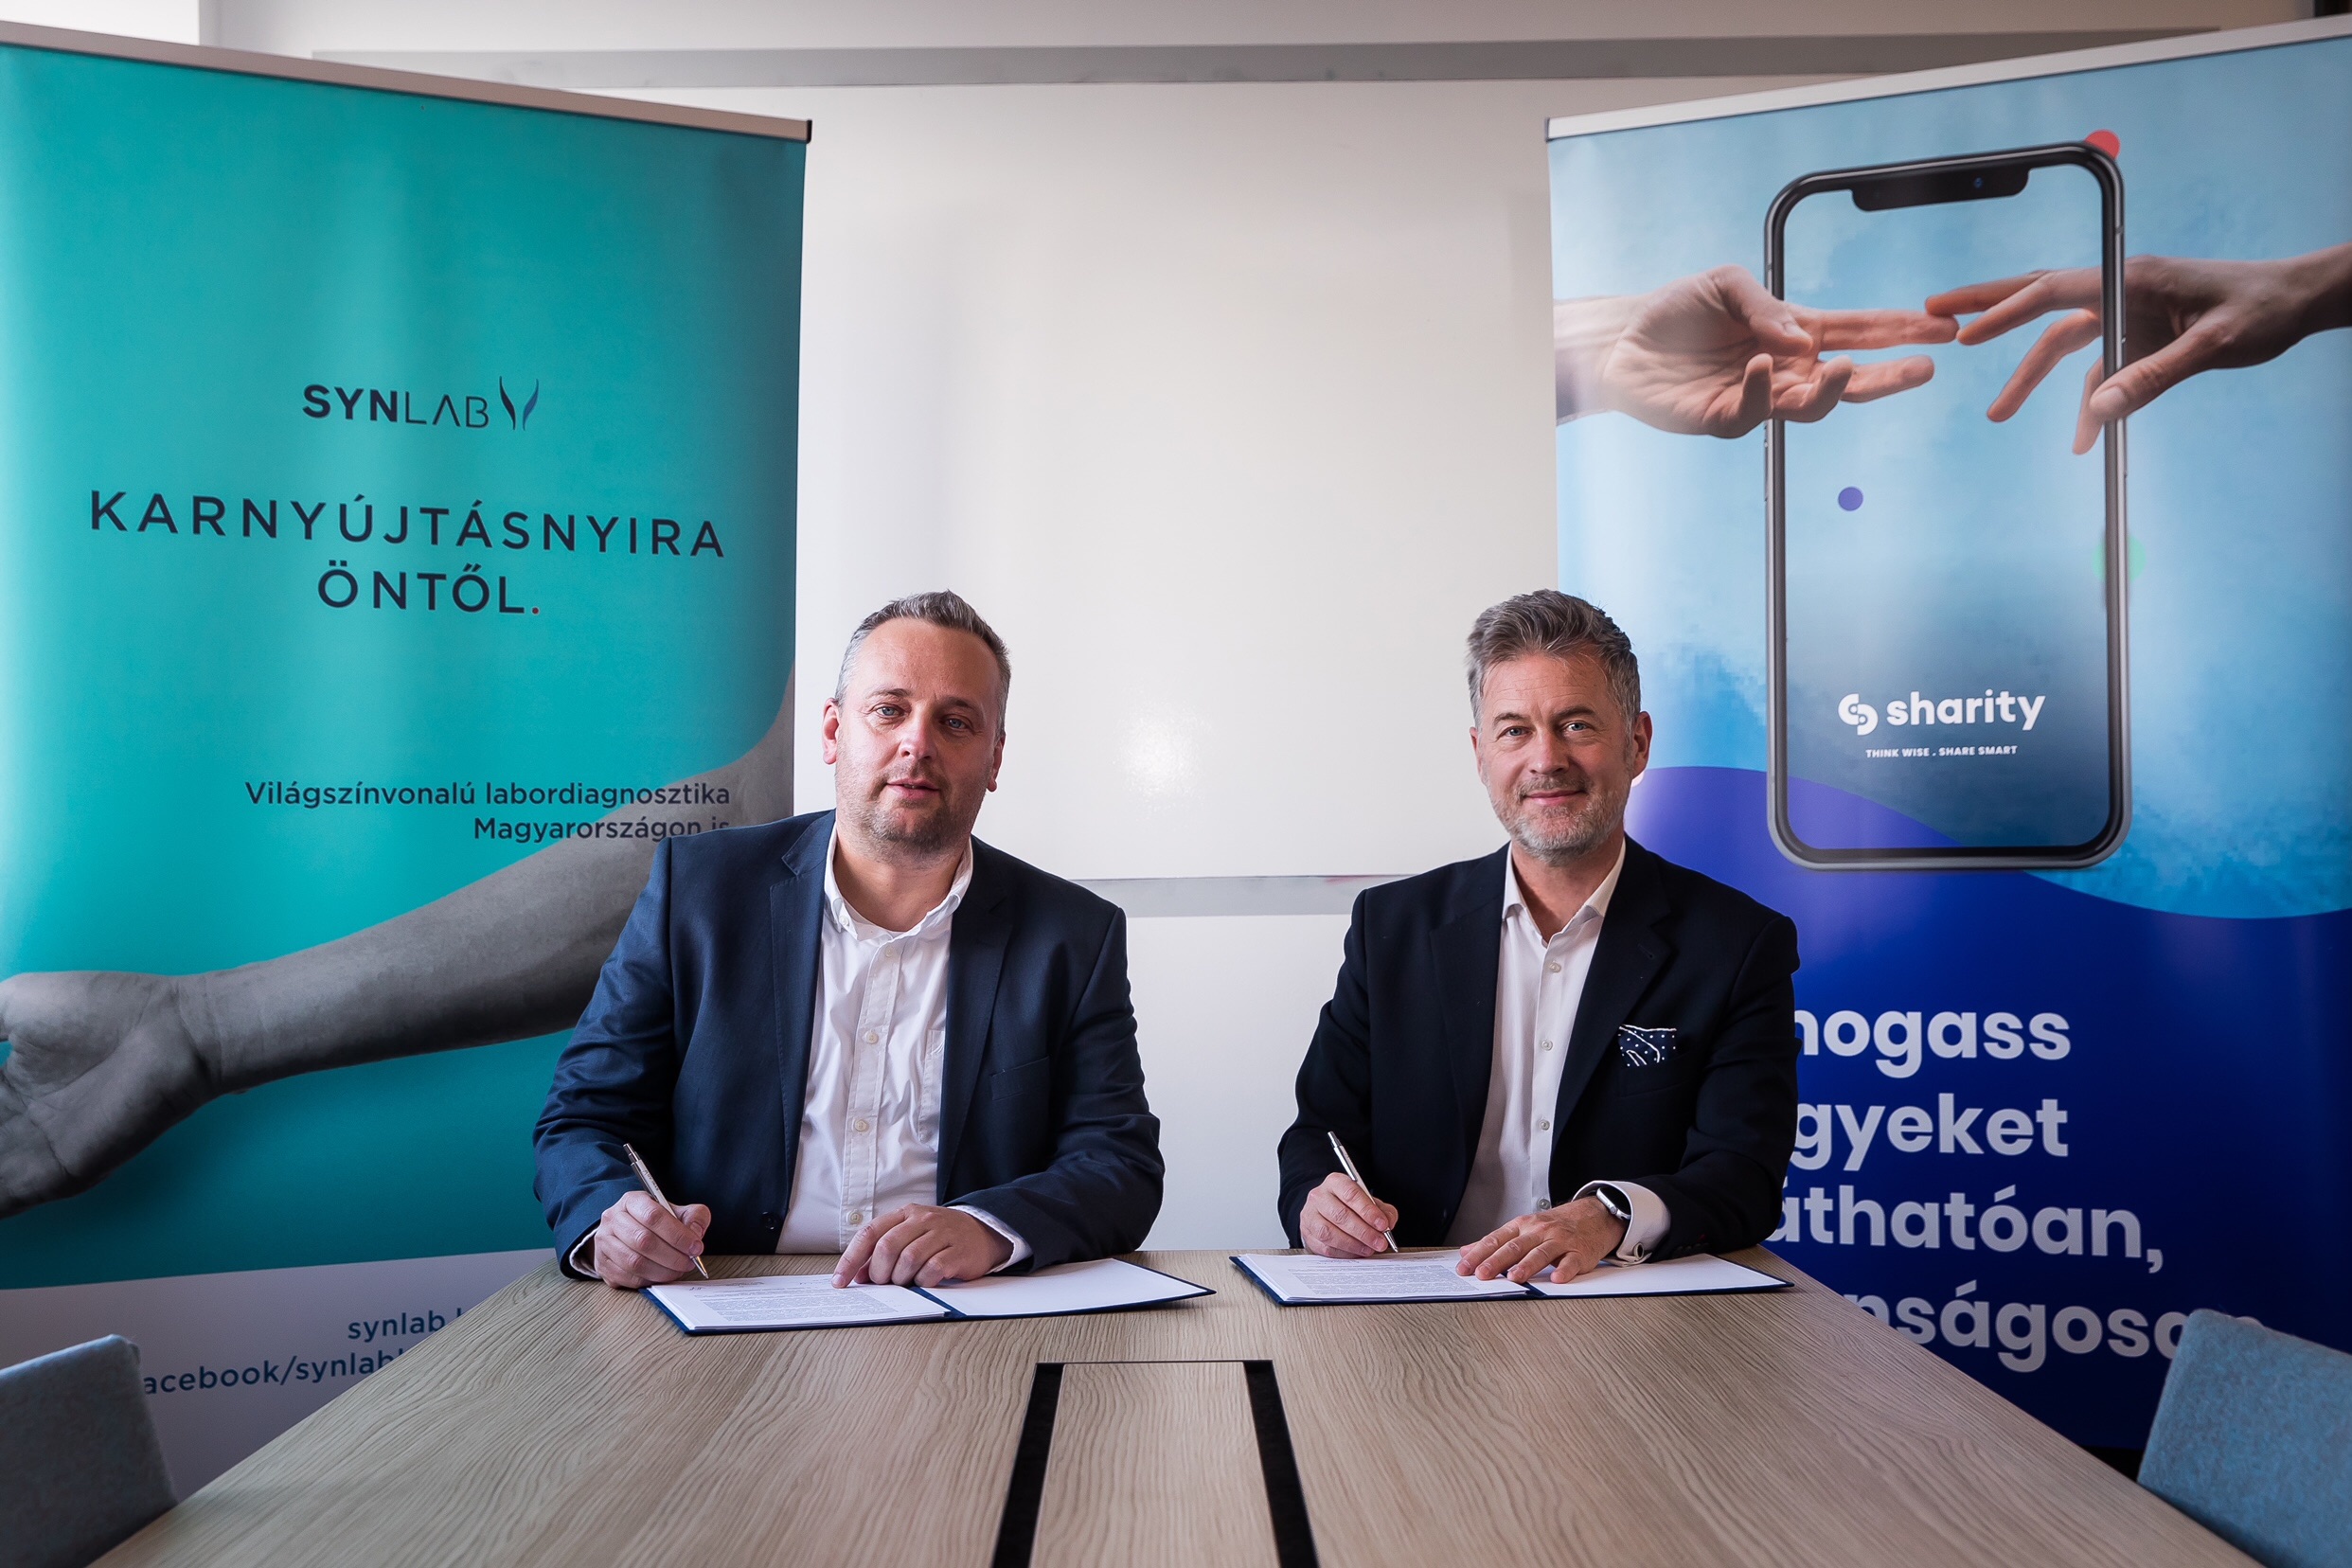 Sharity and Synlab Join Forces on Impact Marketing